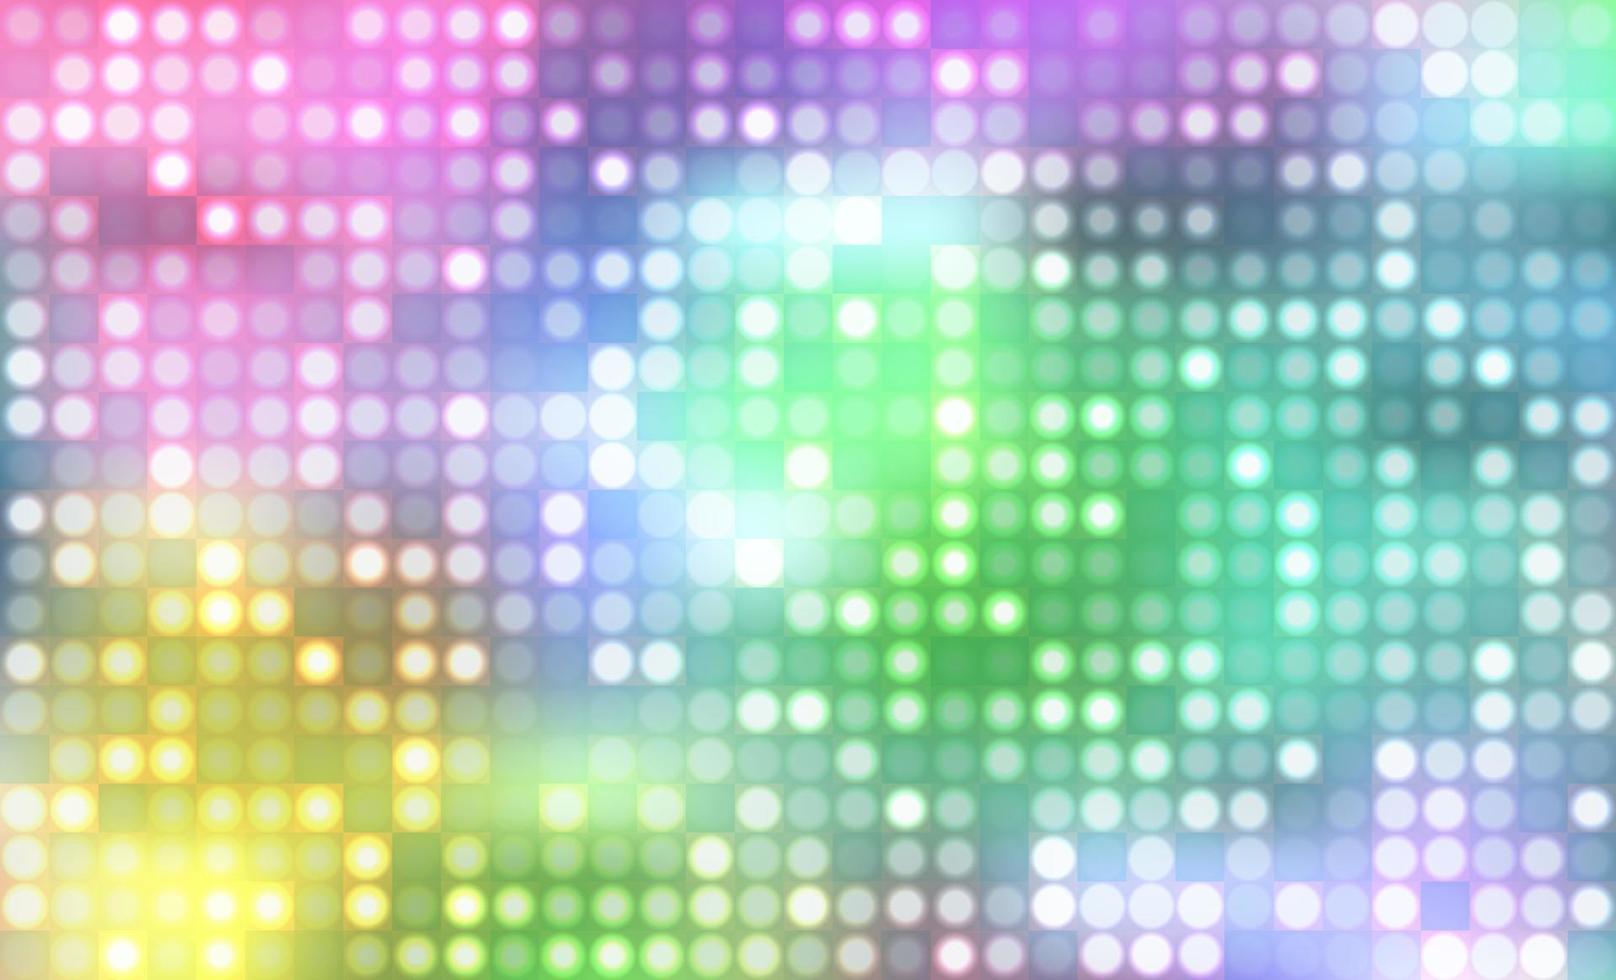 Vector abstract background of colorful glowing dots. Pattern of simple geometric shapes, wallpaper